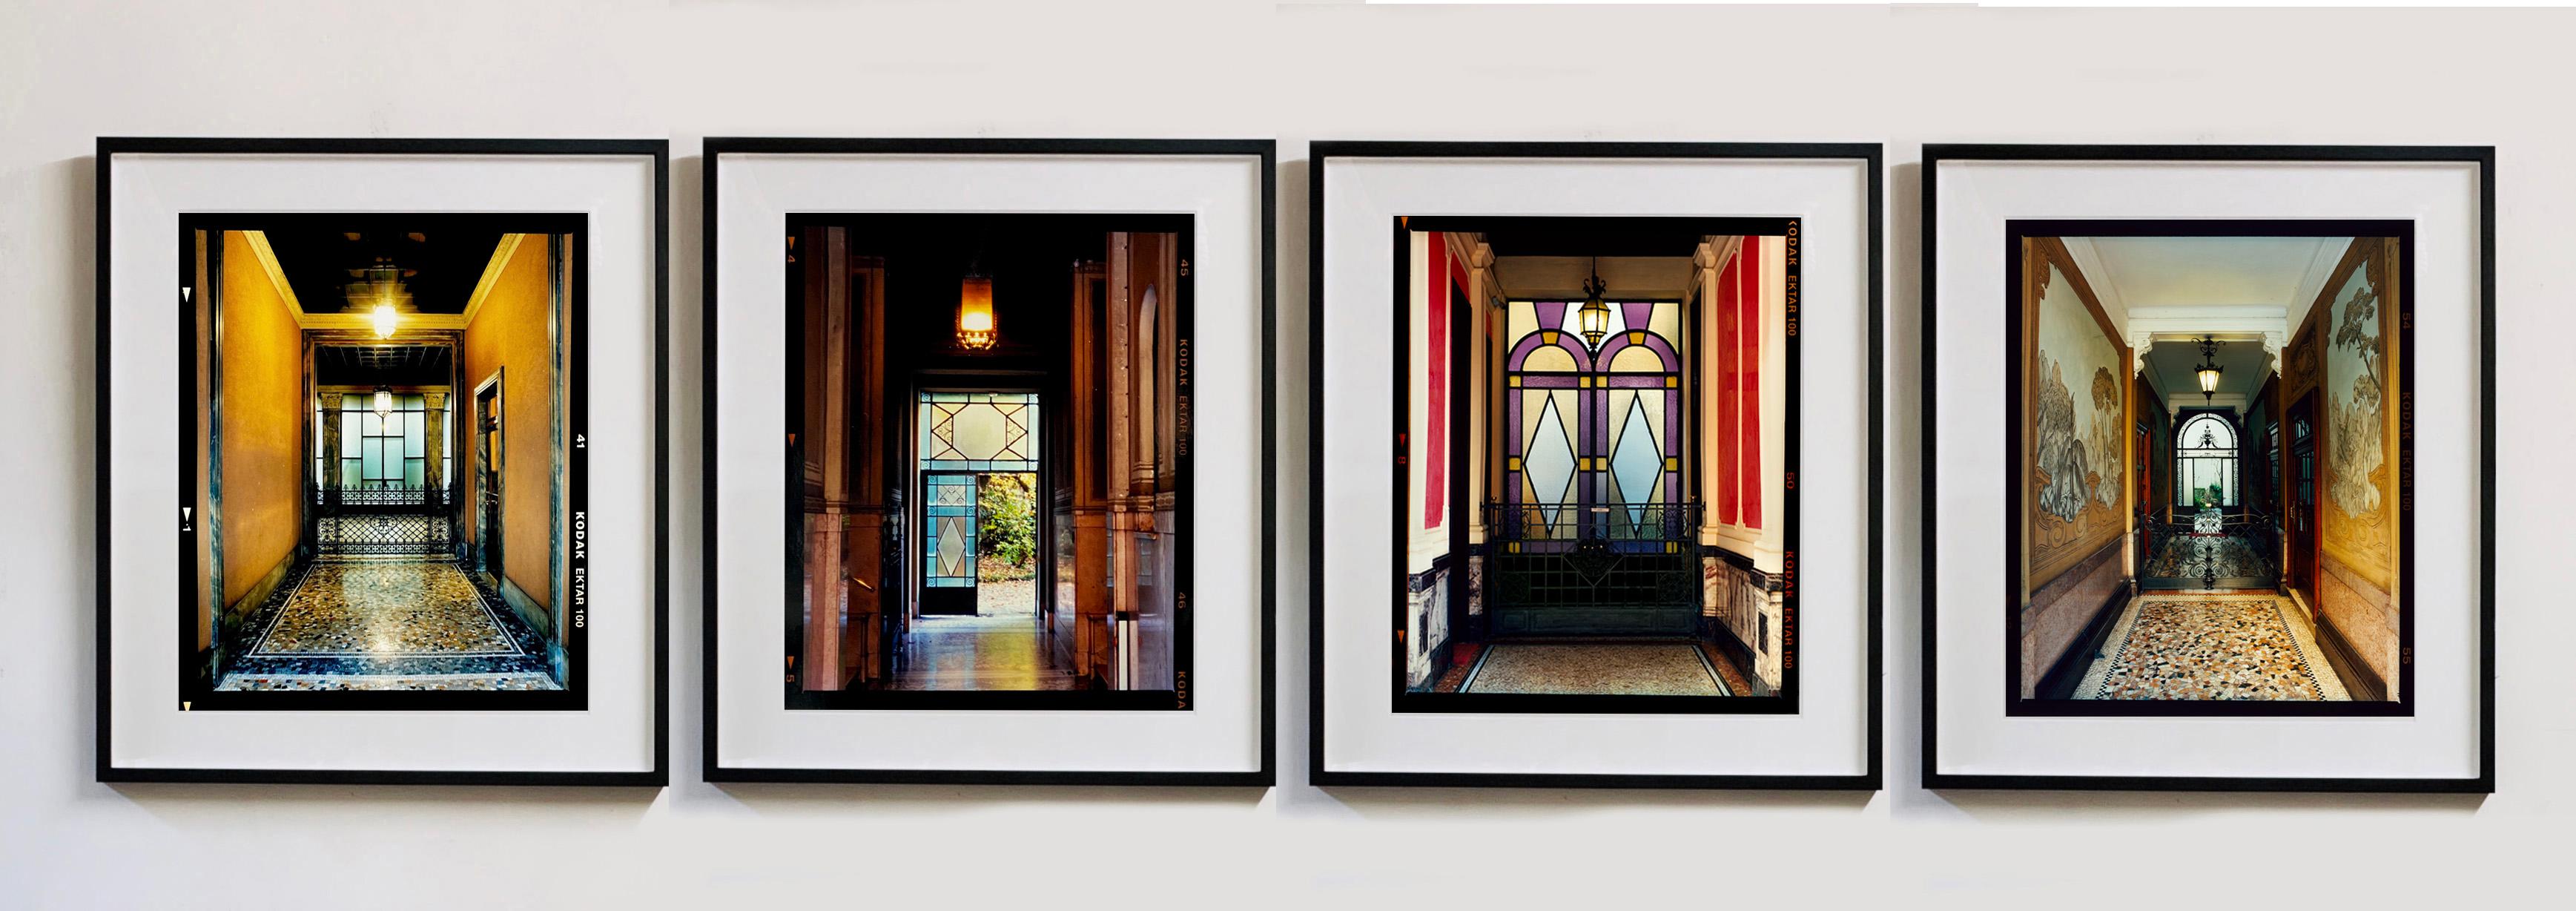 Foyer VII, Milan - Italian interior architectural color photography For Sale 3